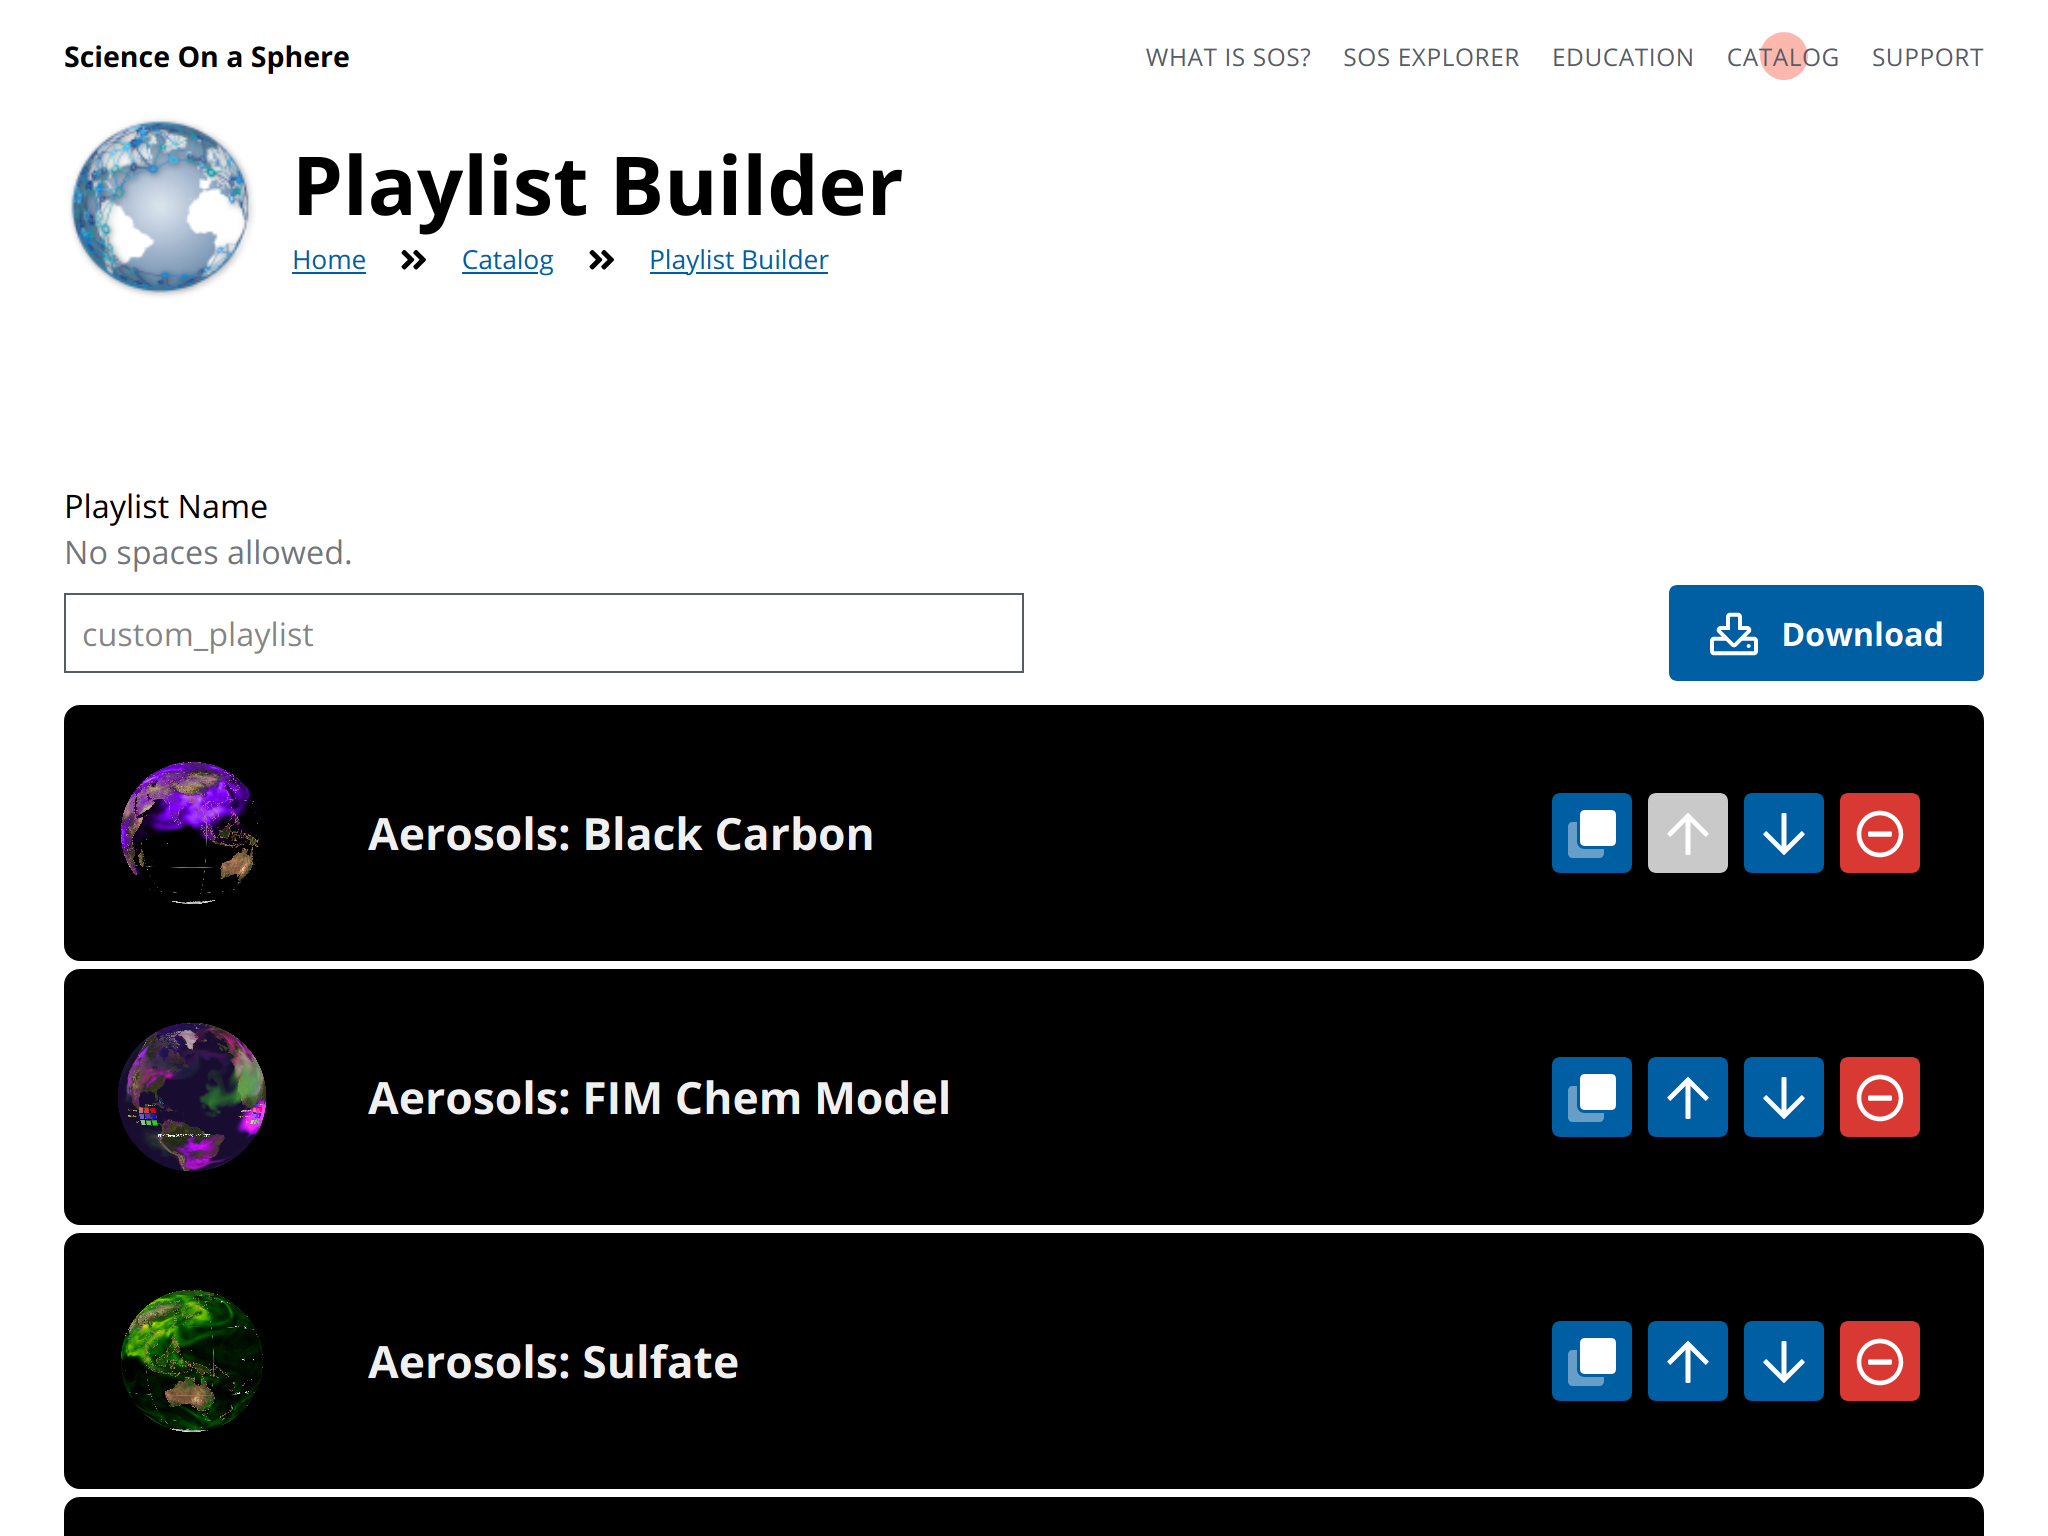 Screenshot of the top of the Playlist Builder interface with the “Playlist Name” field and the “Download” button